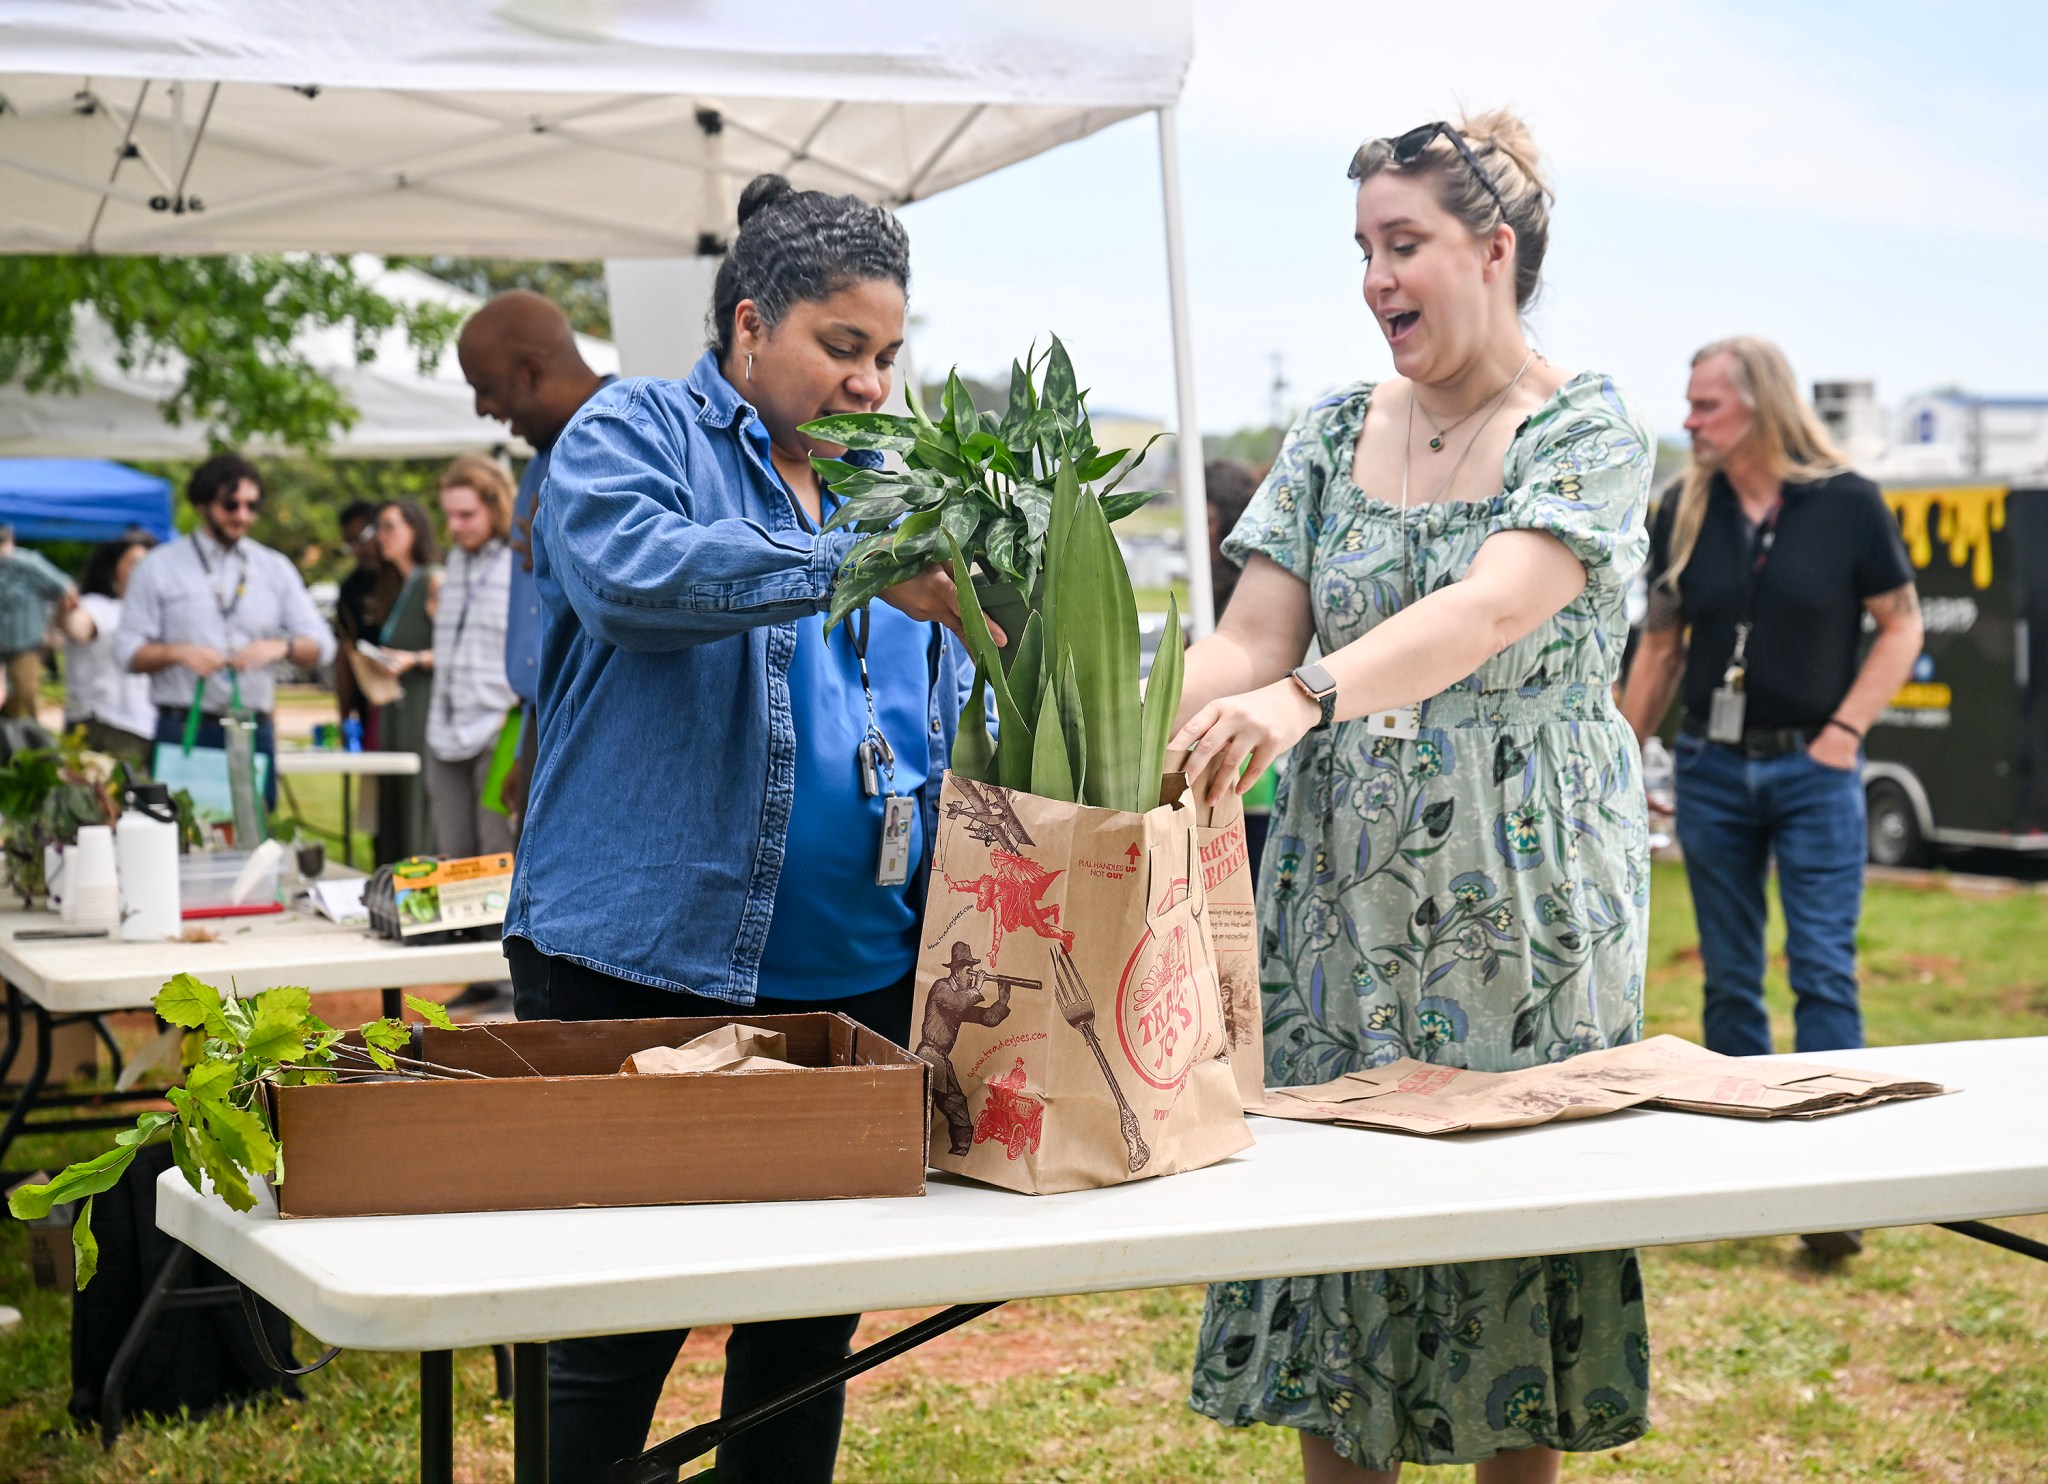 Environmental Protection Specialist Joni Melson, right, lends a helping hand to a fellow plant lover at Marshall’s Earth Day celebration April 25. Melson led Marshall’s planning and coordination for the event, a joint effort with Team Redstone.